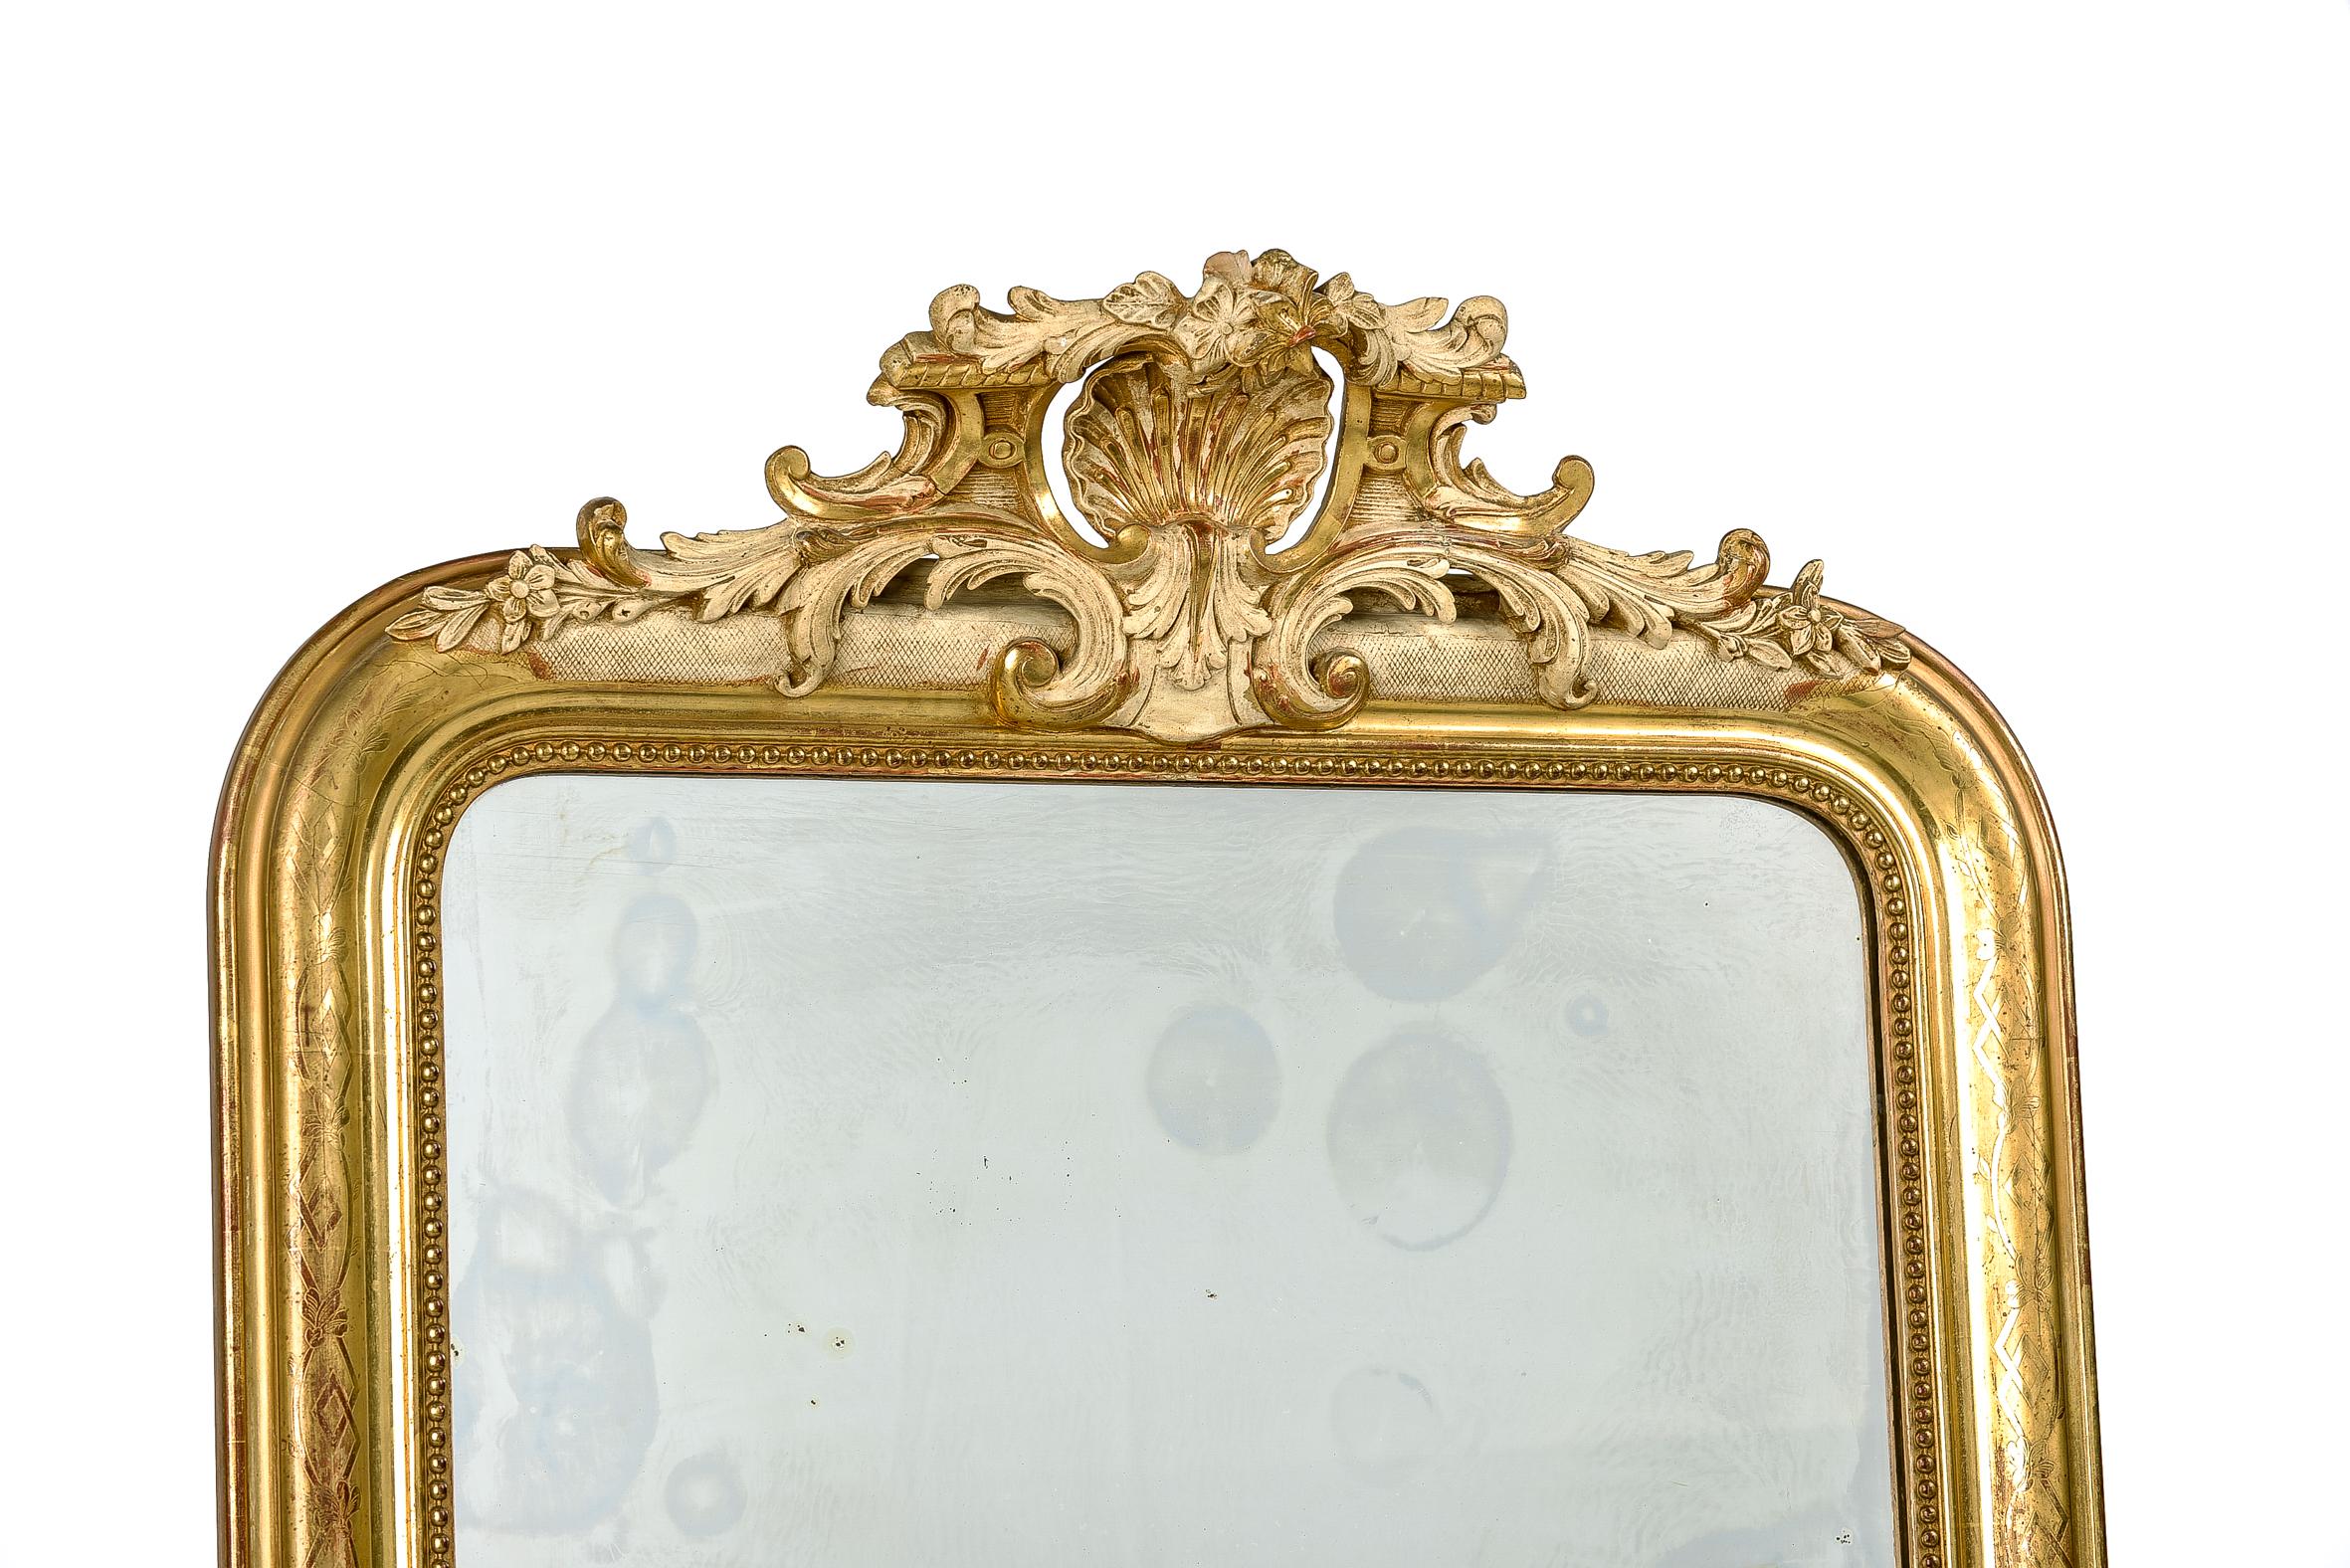 A beautiful antique mirror that originates in France, circa 1870. The mirror has the upper rounded corners typical for Louis Philippe mirrors. The mirror has a rich, ornamented crest with a central scallop shell motif flanked by acanthus and